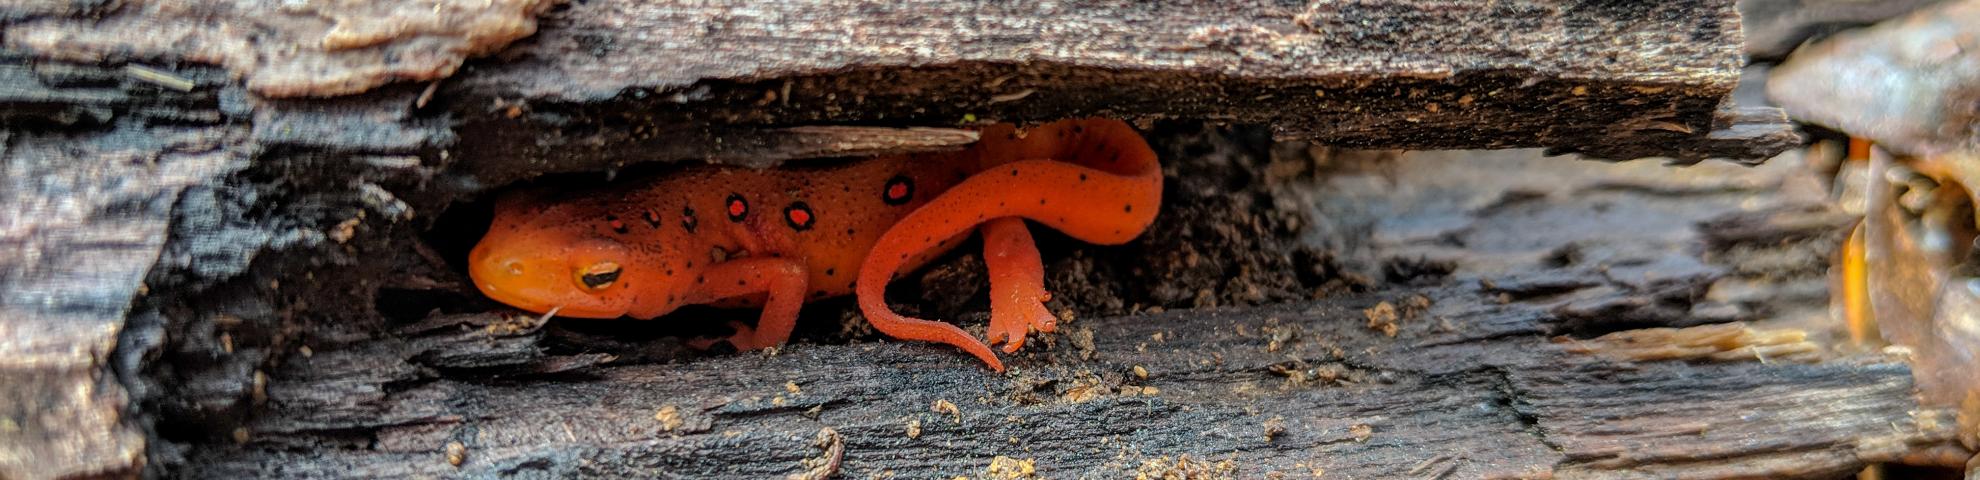 A bright orange lizard in the crevice of a piece of wood on the forest floor.